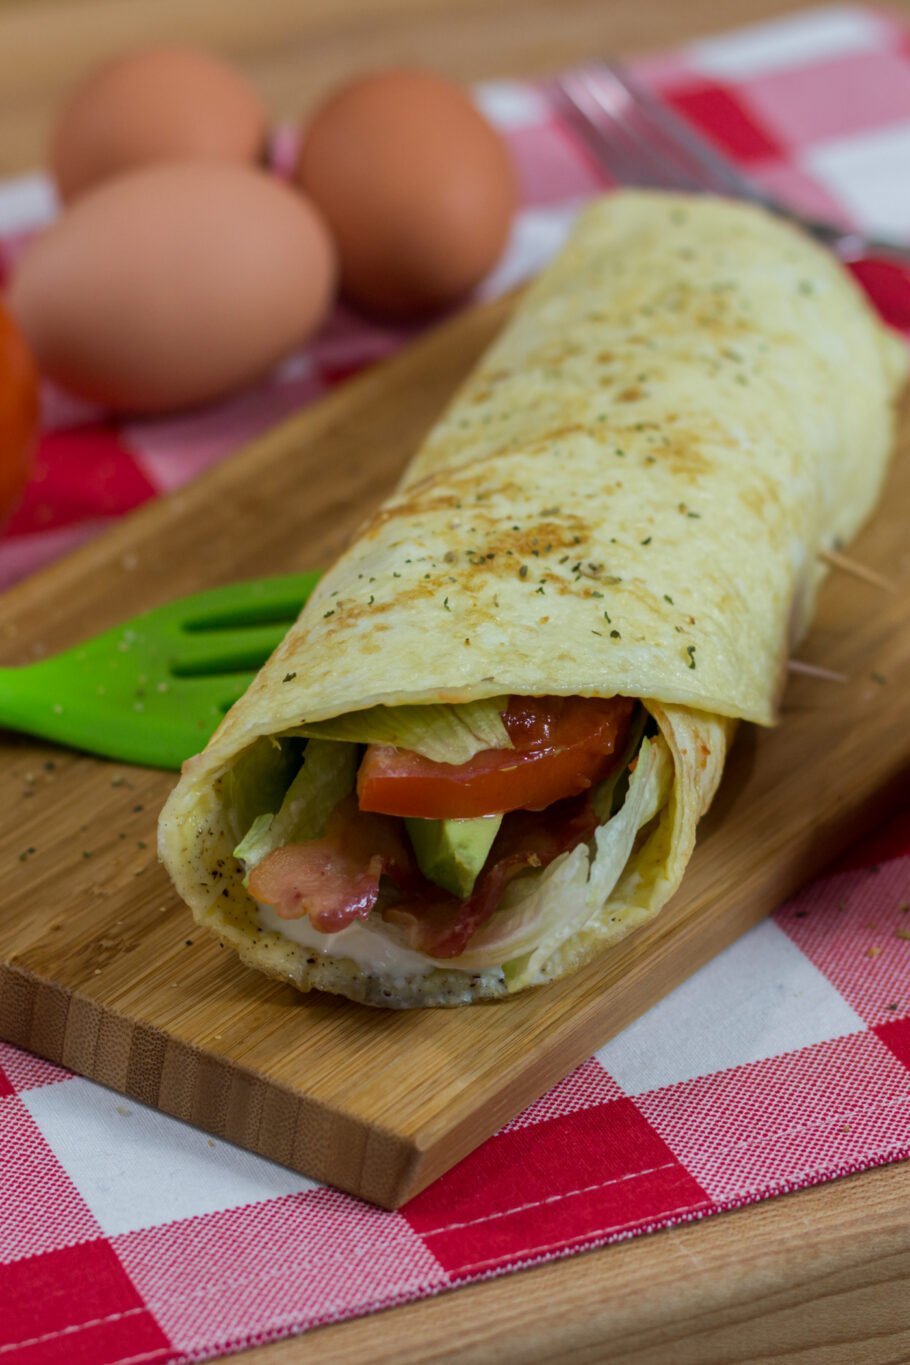 https://media.theproteinchef.co/wp-content/uploads/2020/07/Low-Carb-Breakfast-Egg-Burrito-Rolled-910x1365.jpg